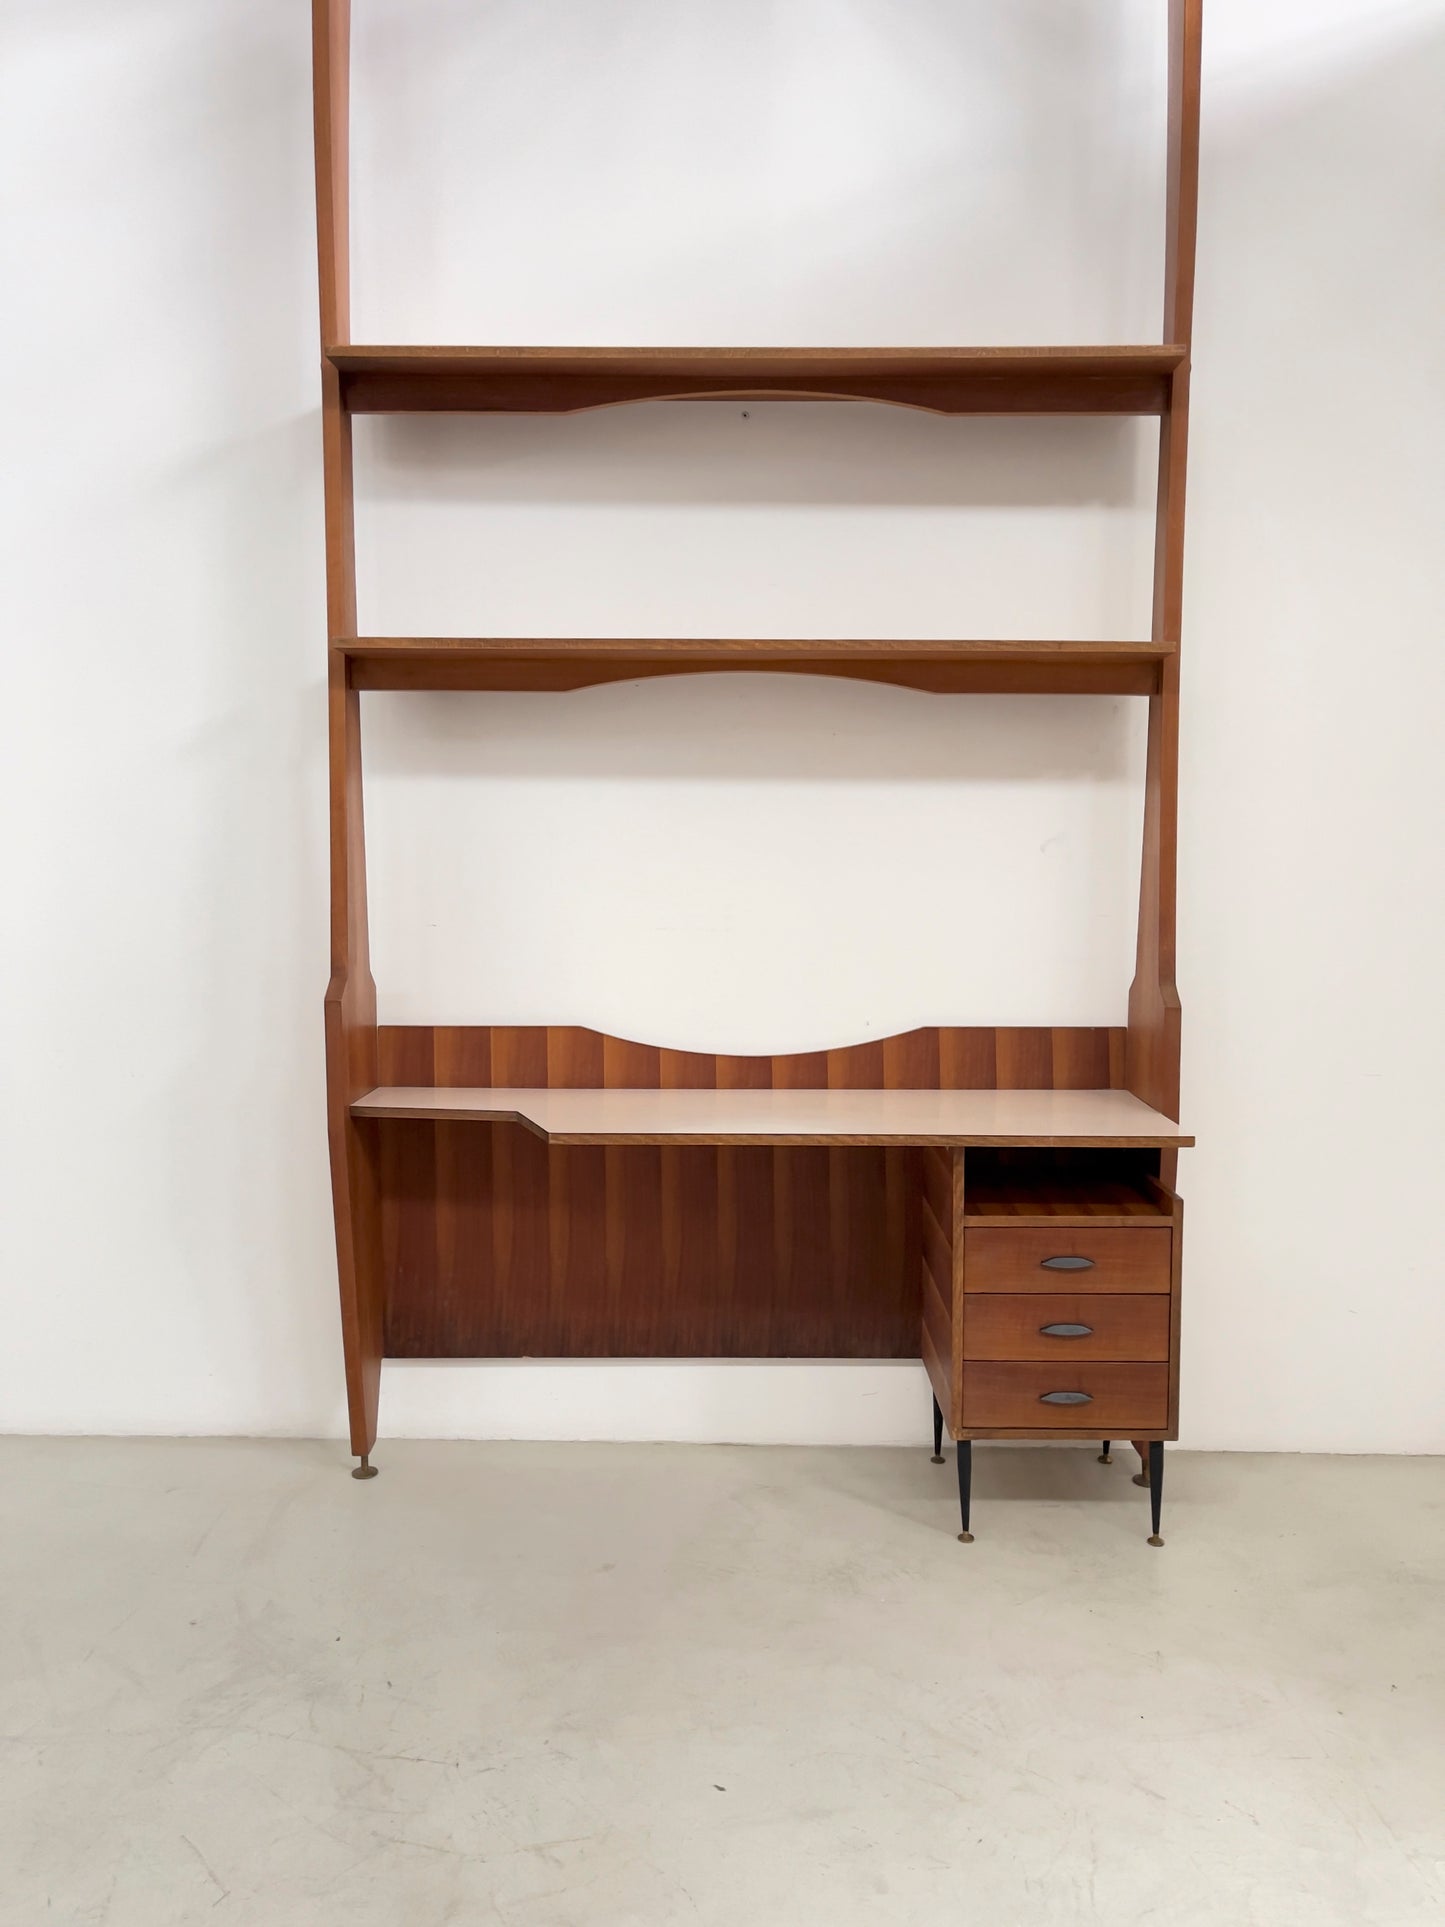 Italian Bookcase/desk with chair